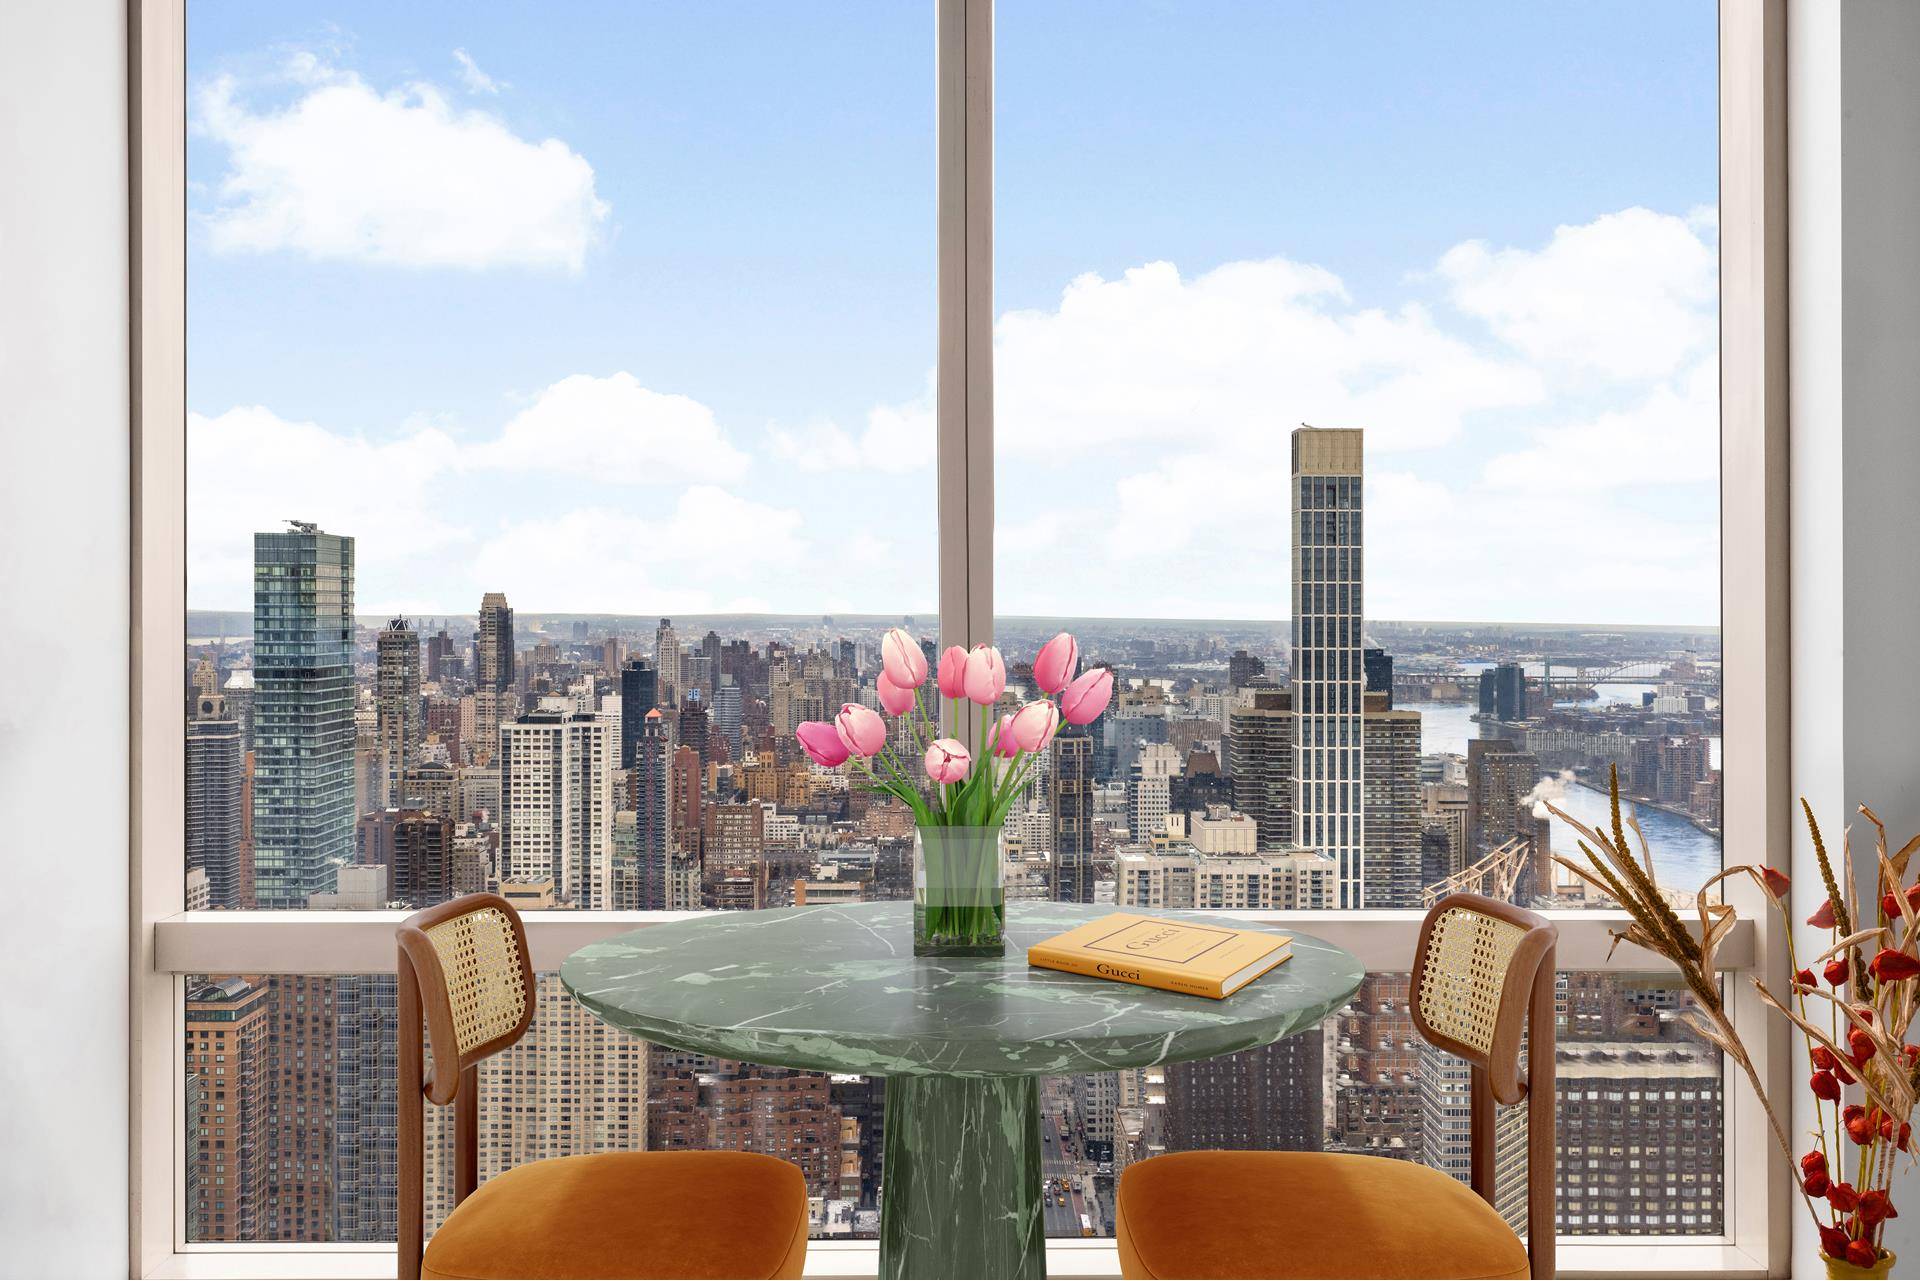 Residence 65A is situated on the highest floor at 845 United Nations Plaza for this special 2 bedroom offering.